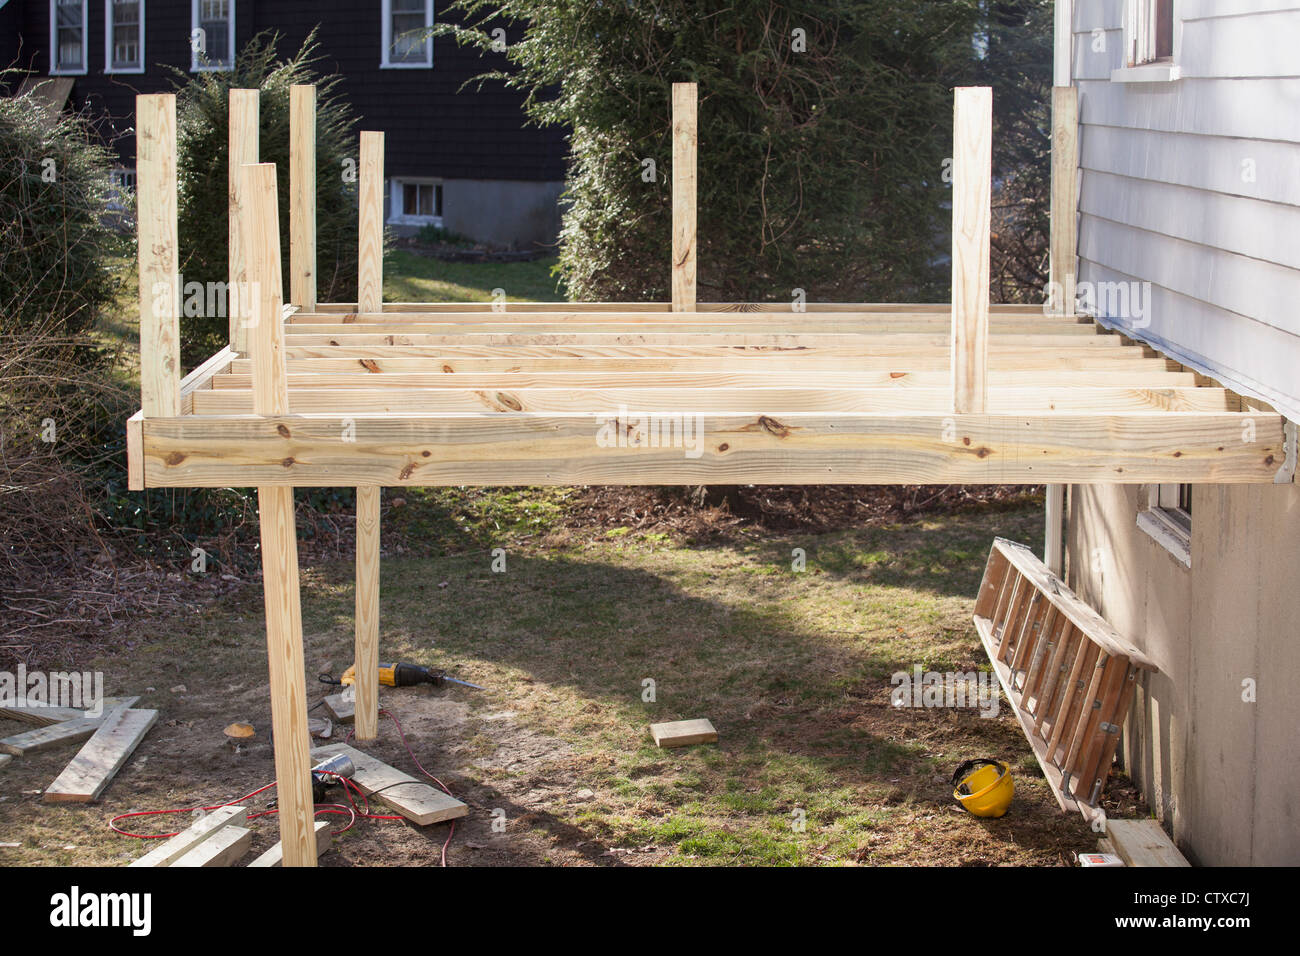 Pressure treated deck under construction on home Stock Photo